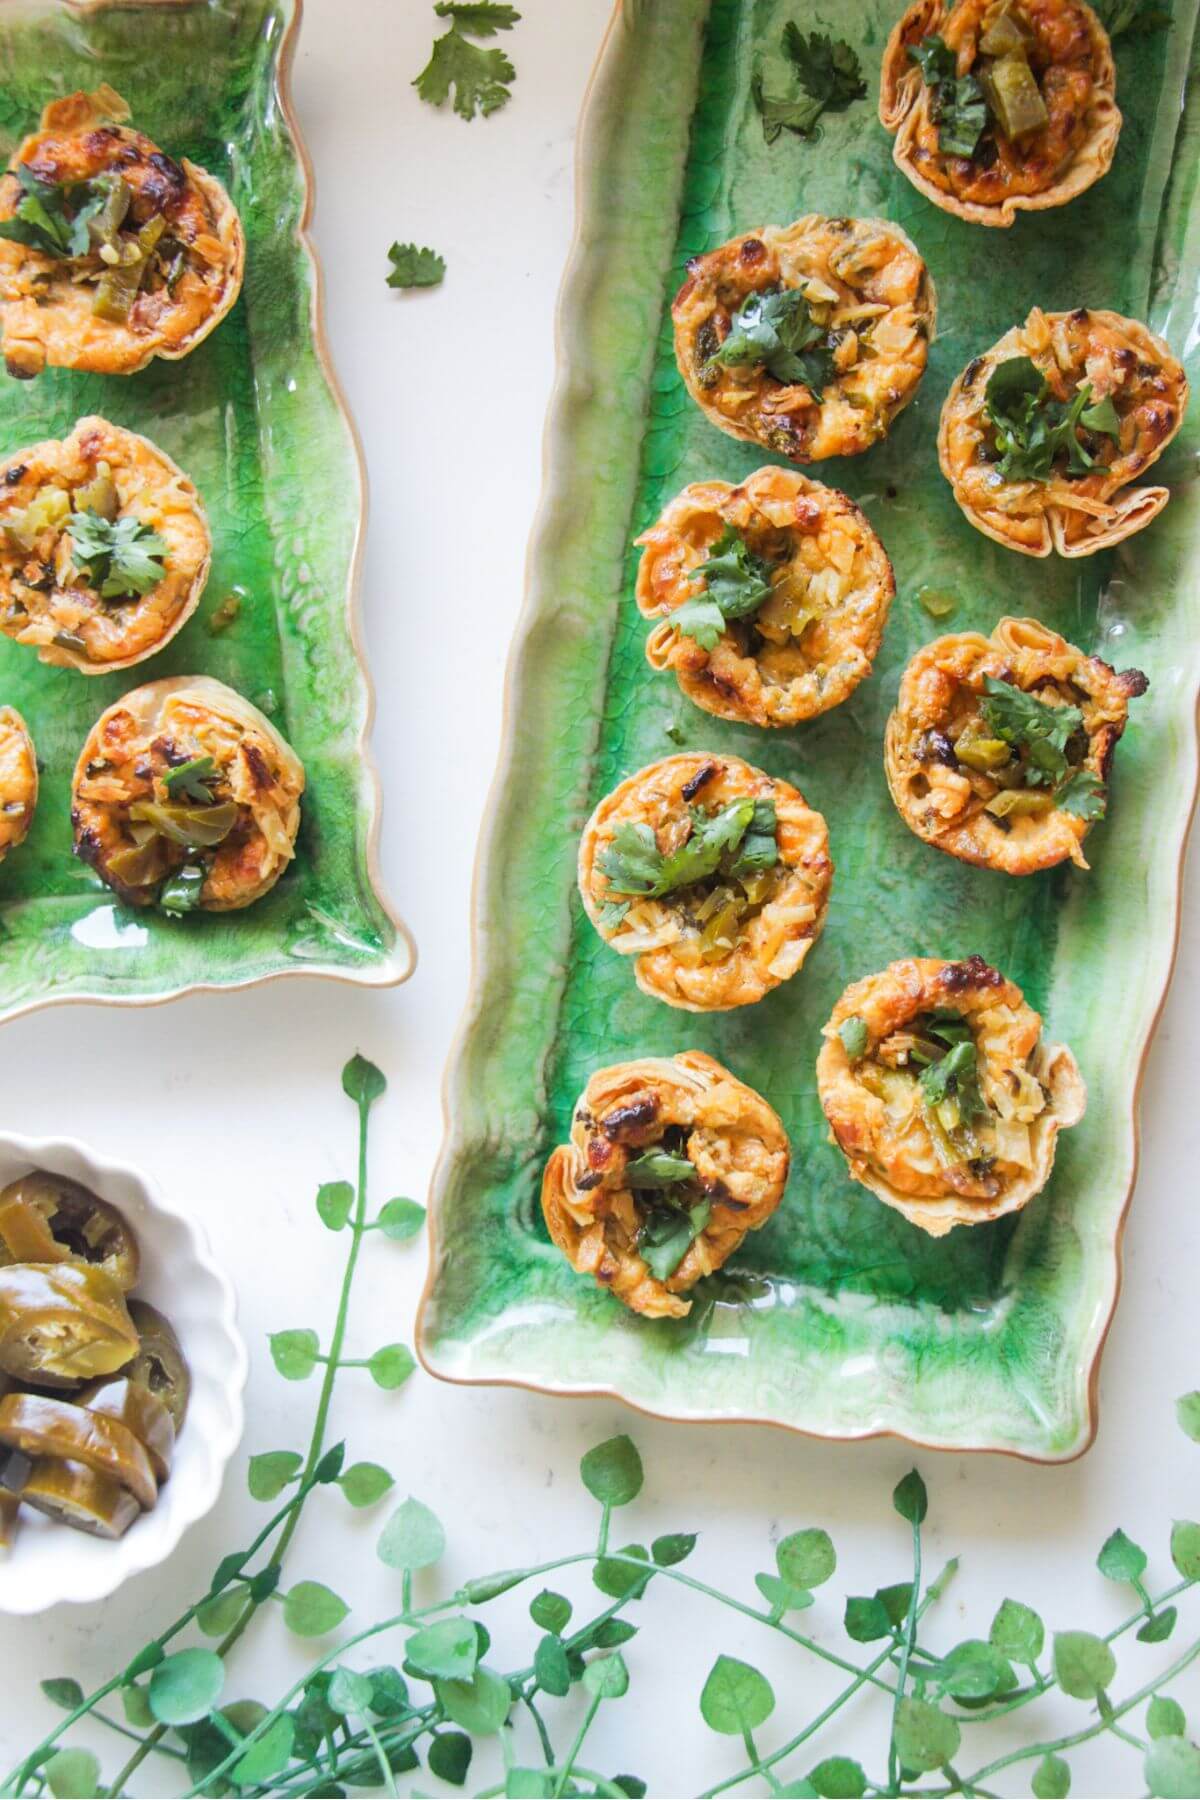 Jalapeno popper taco cups on a green rectangular plate, with a bowl of jalapenos on the side.